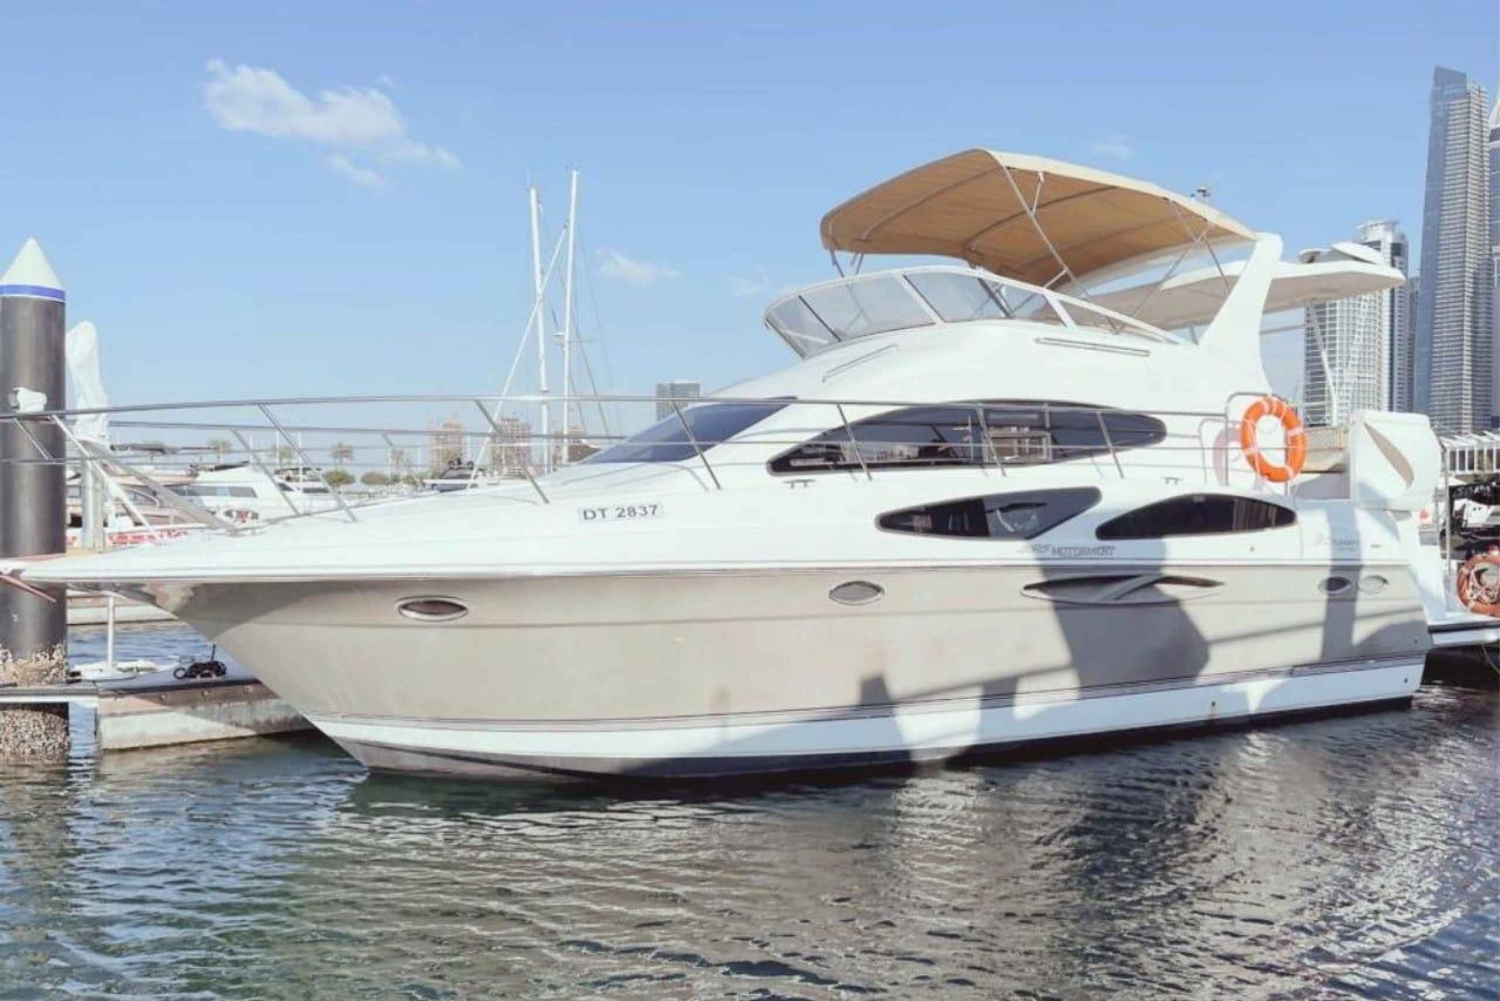 Dubai : Private Luxury Yacht Tour Up to 17 People on 52-Foot